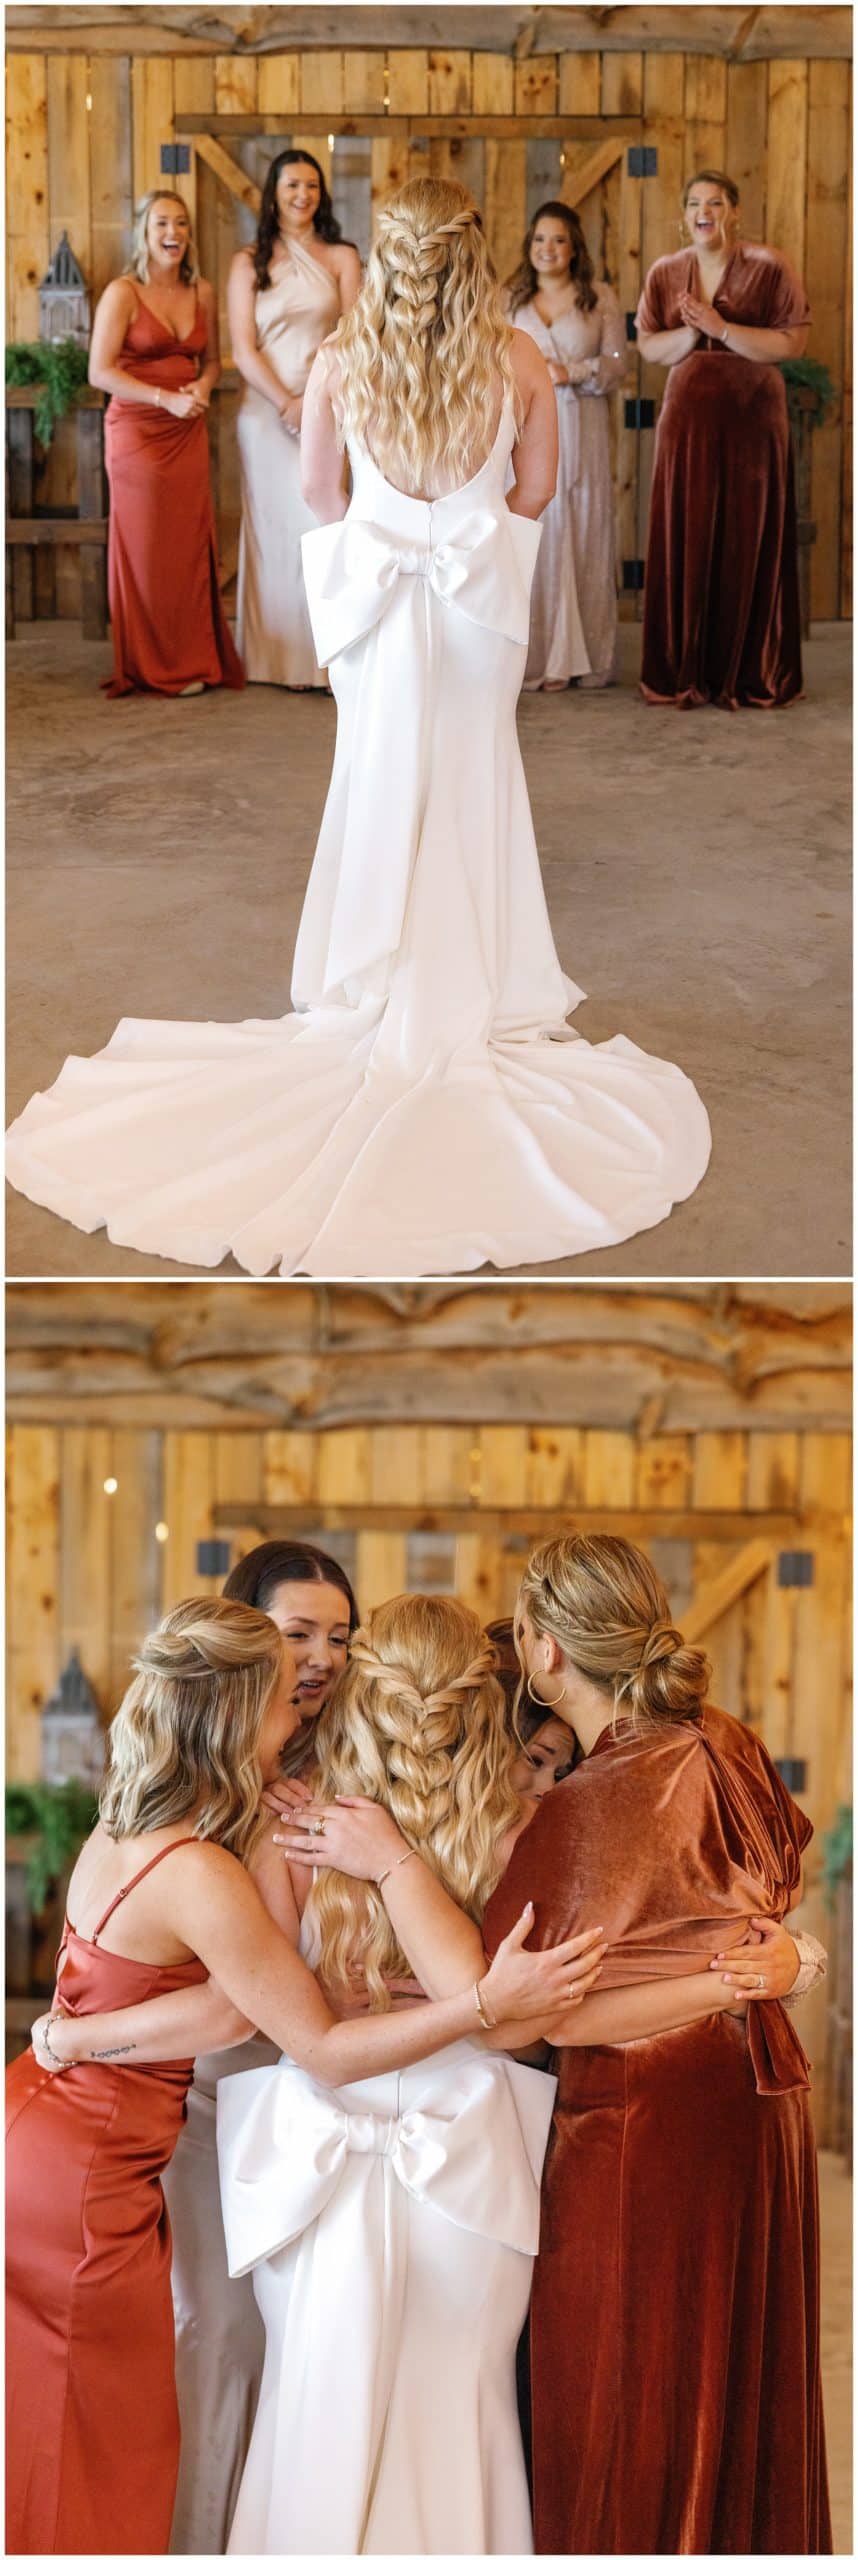 bridesmaids react to seeing bride in her dress for the first time